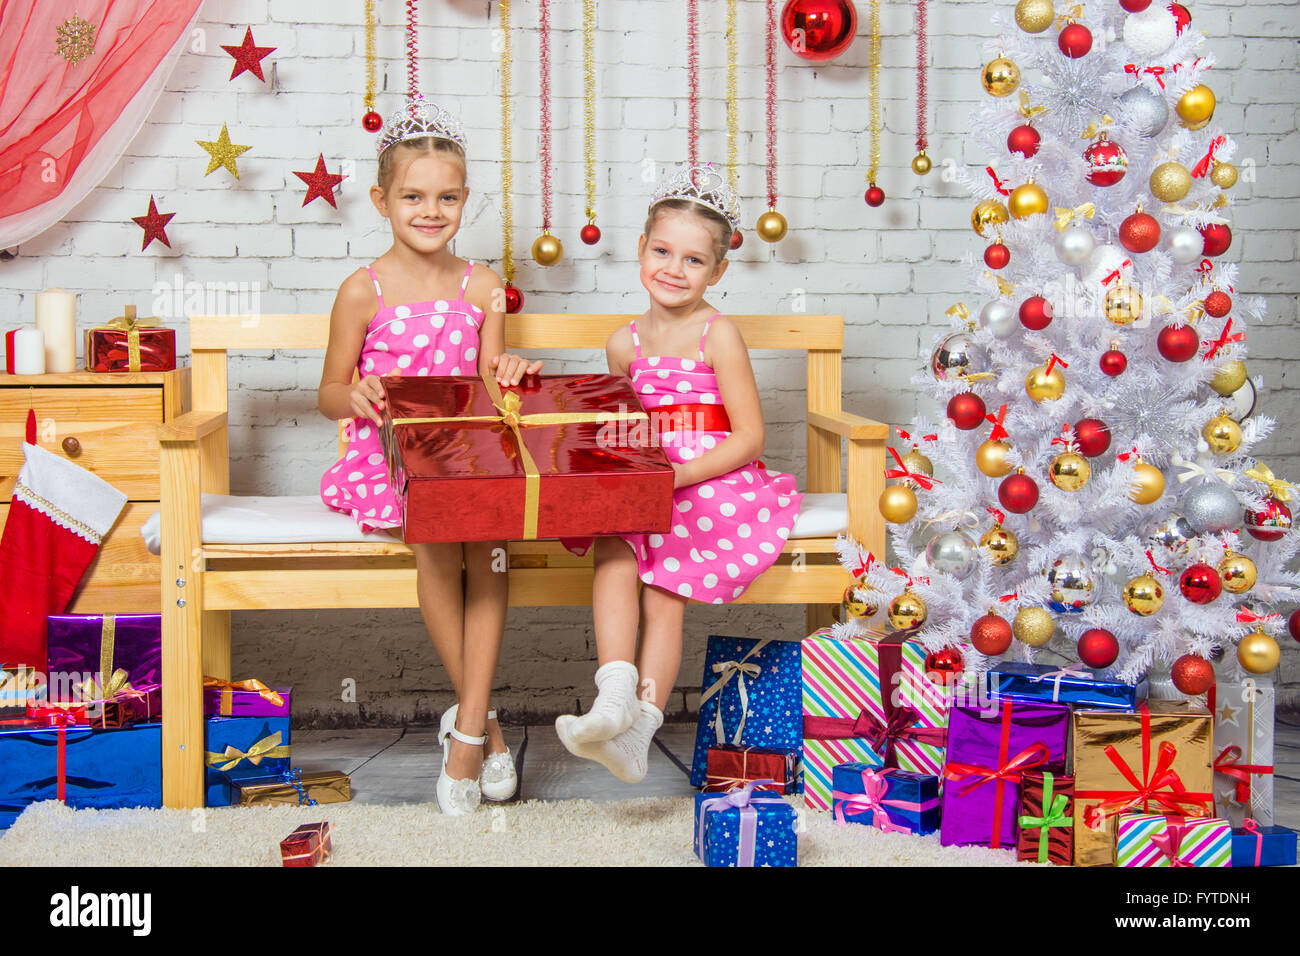 Happy girl who gave a great gift sitting on a bench in a Christmas setting Stock Photo